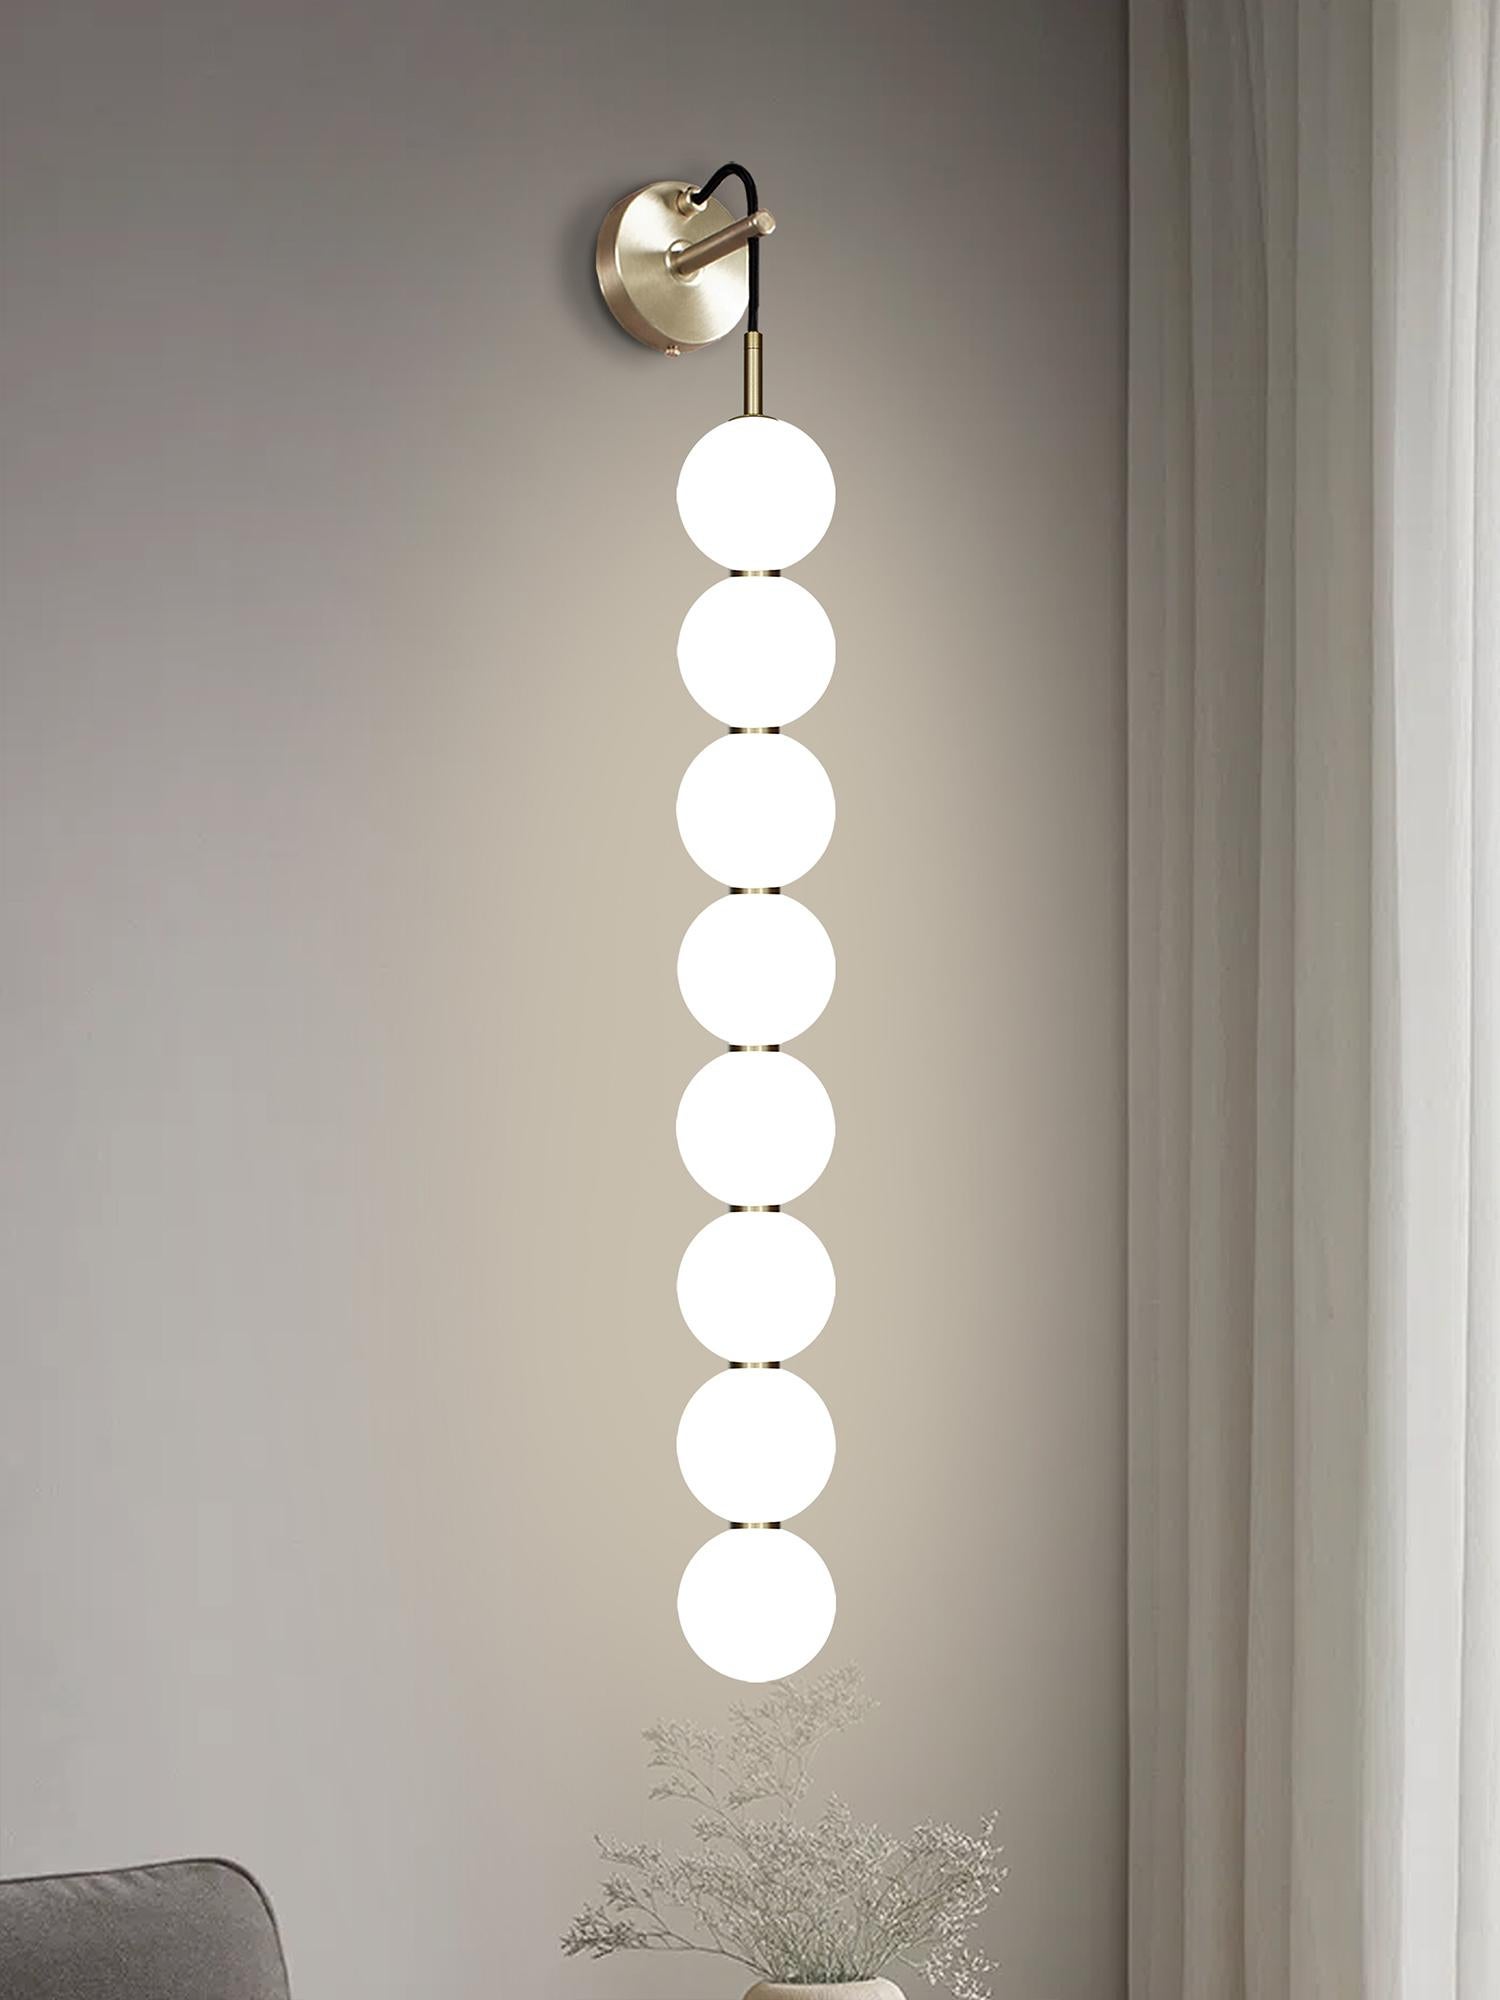 Two delicate white opaline glass orbs stacked on top of one another to create an echoed glow of light and the illusion of subtle reflections.